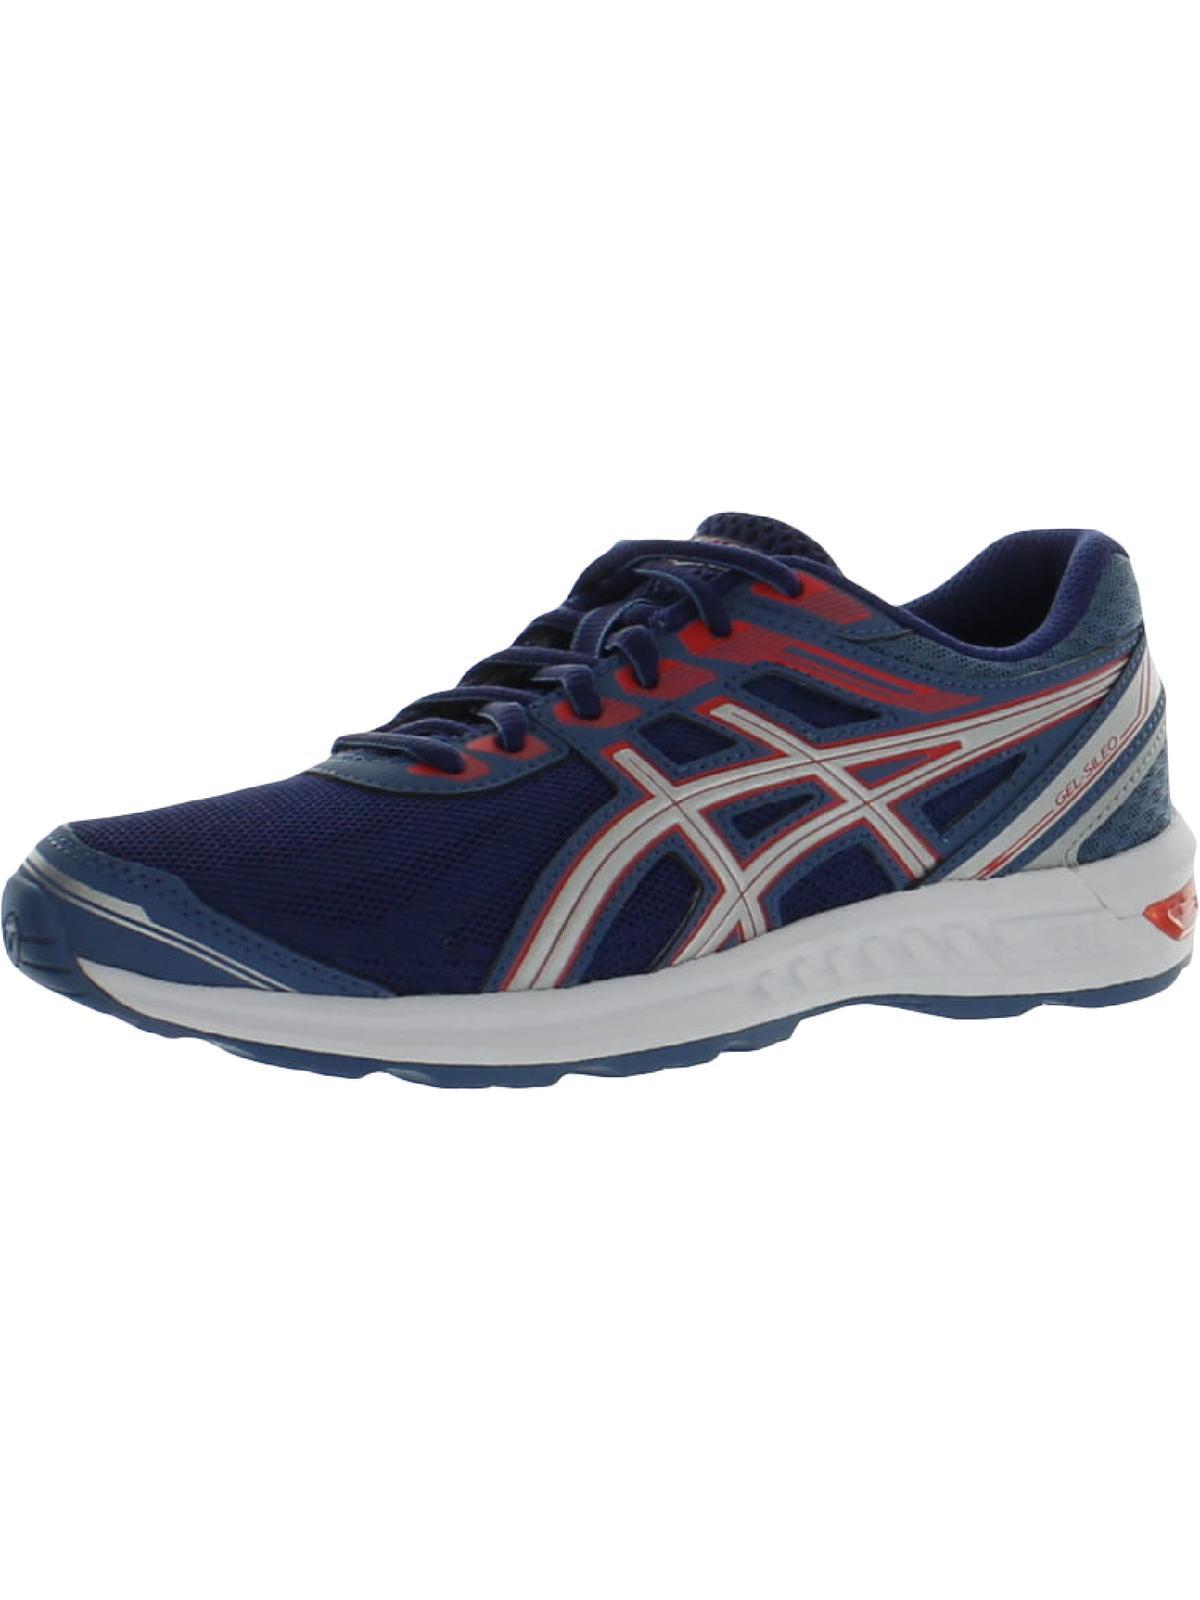 Asics Gel-sileo Trainers Comfort Running Shoes in Blue | Lyst